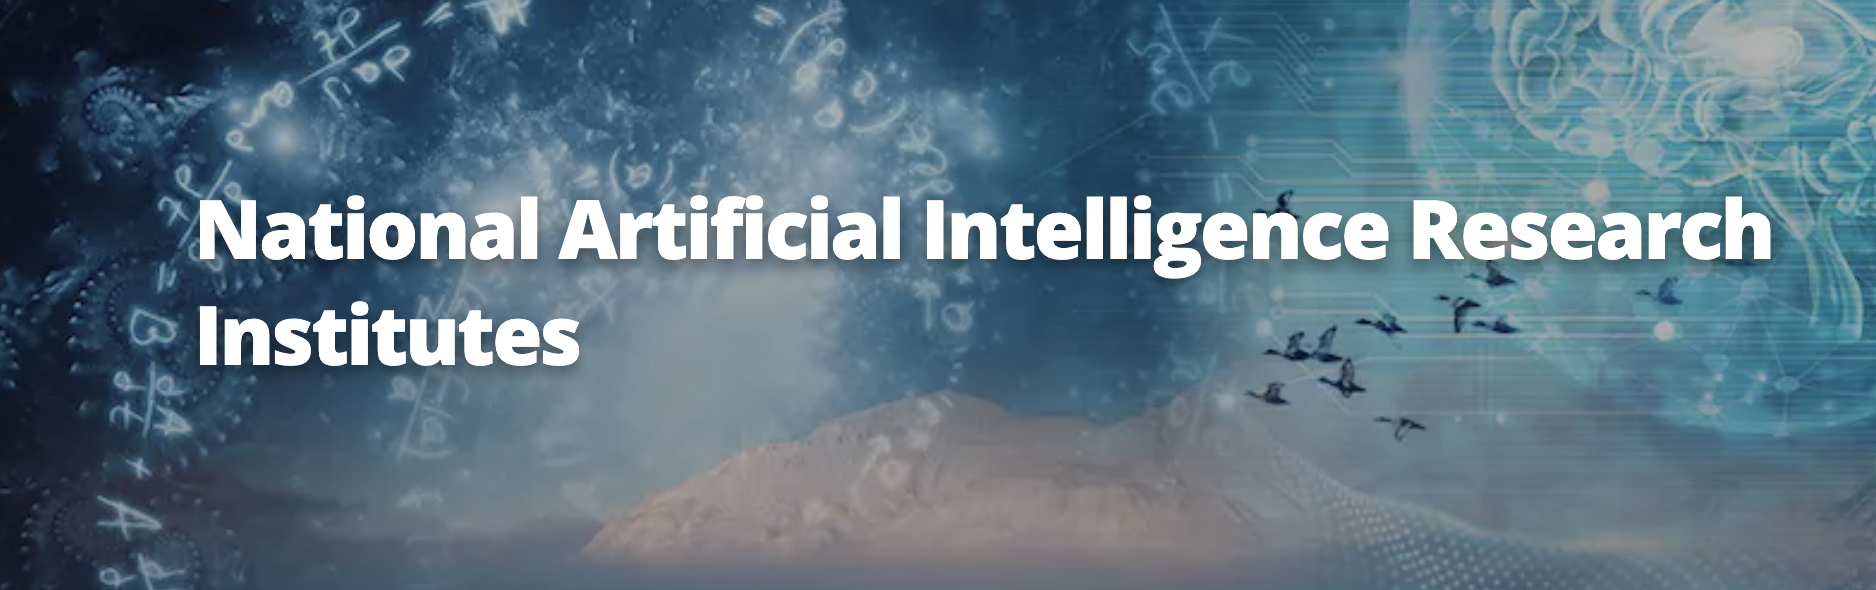 National Artificial Intelligence Research Institutes